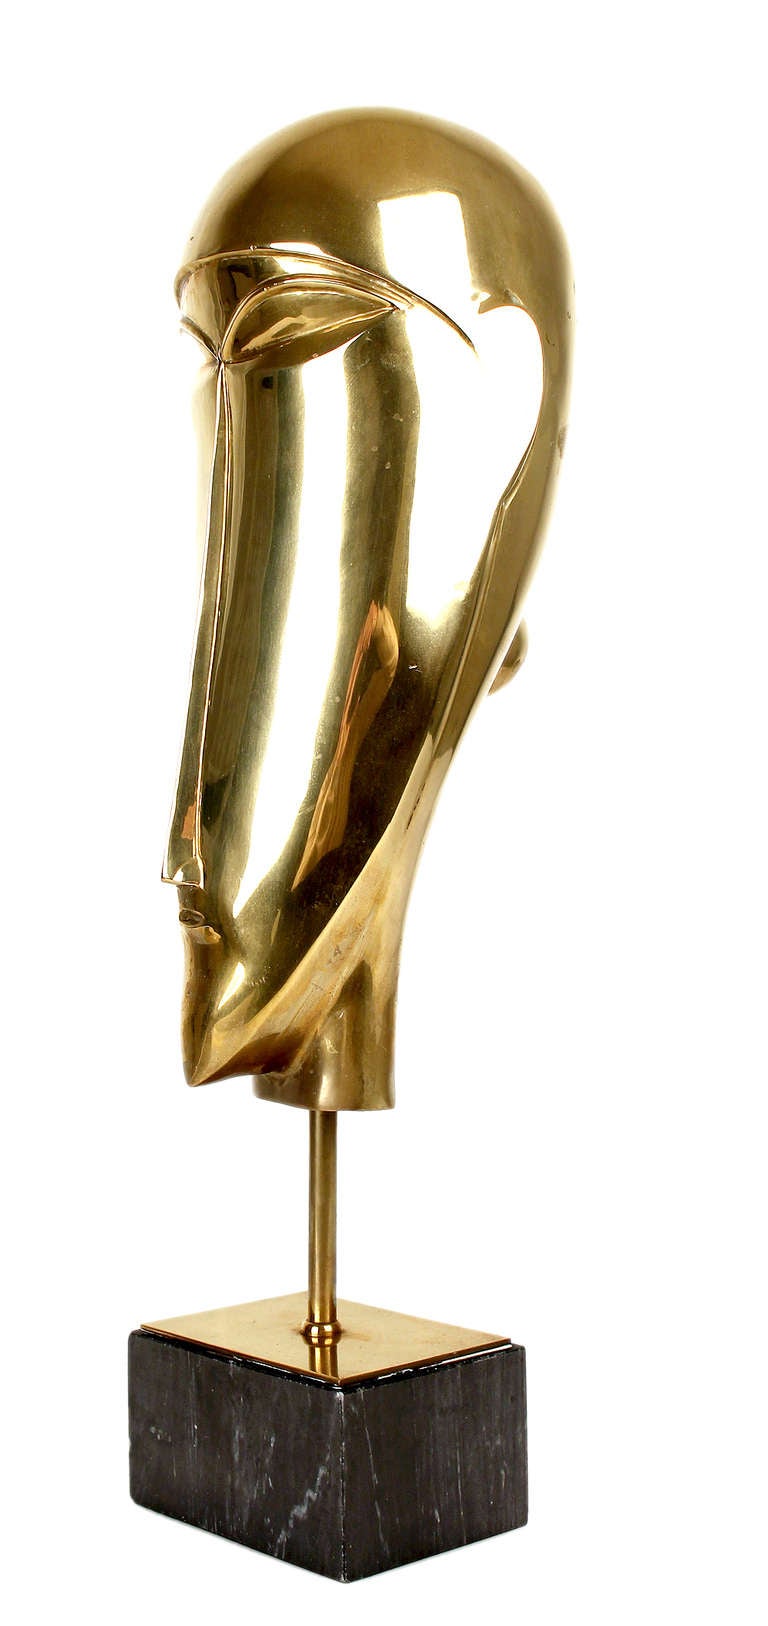 Japanese Large Art Deco Brass Woman Sculpture, Tribal Inspired Style, 1930s Modernist  For Sale